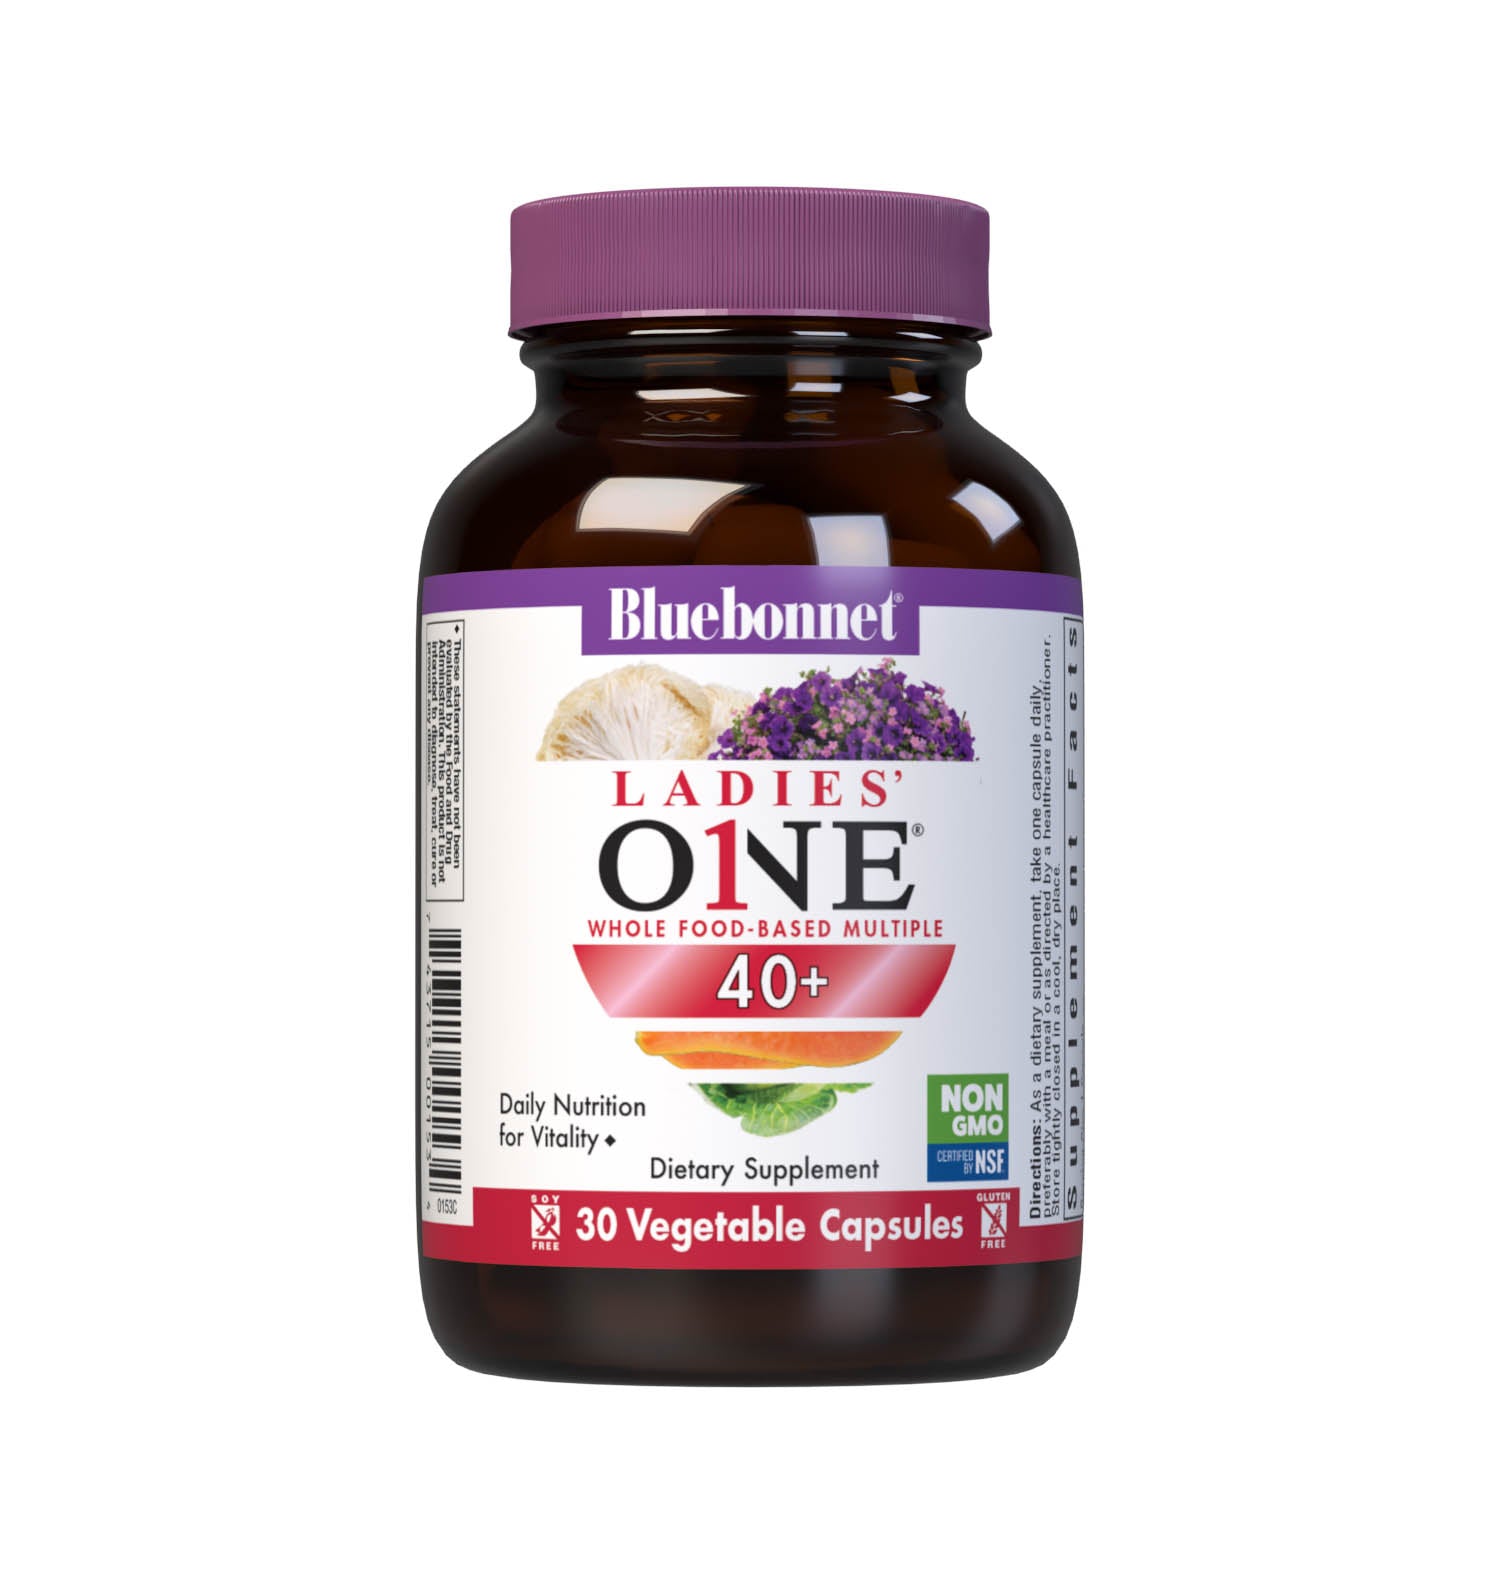 Bluebonnet’s Ladies’ ONE 40+ Whole Food-Based Multiple 30 Vegetable Capsules are formulated for daily nutritional support and vitality for women over 40. Helps to increase energy and vitality, protect beautiful skin, enhance mood, and support heart health. #size_30 count